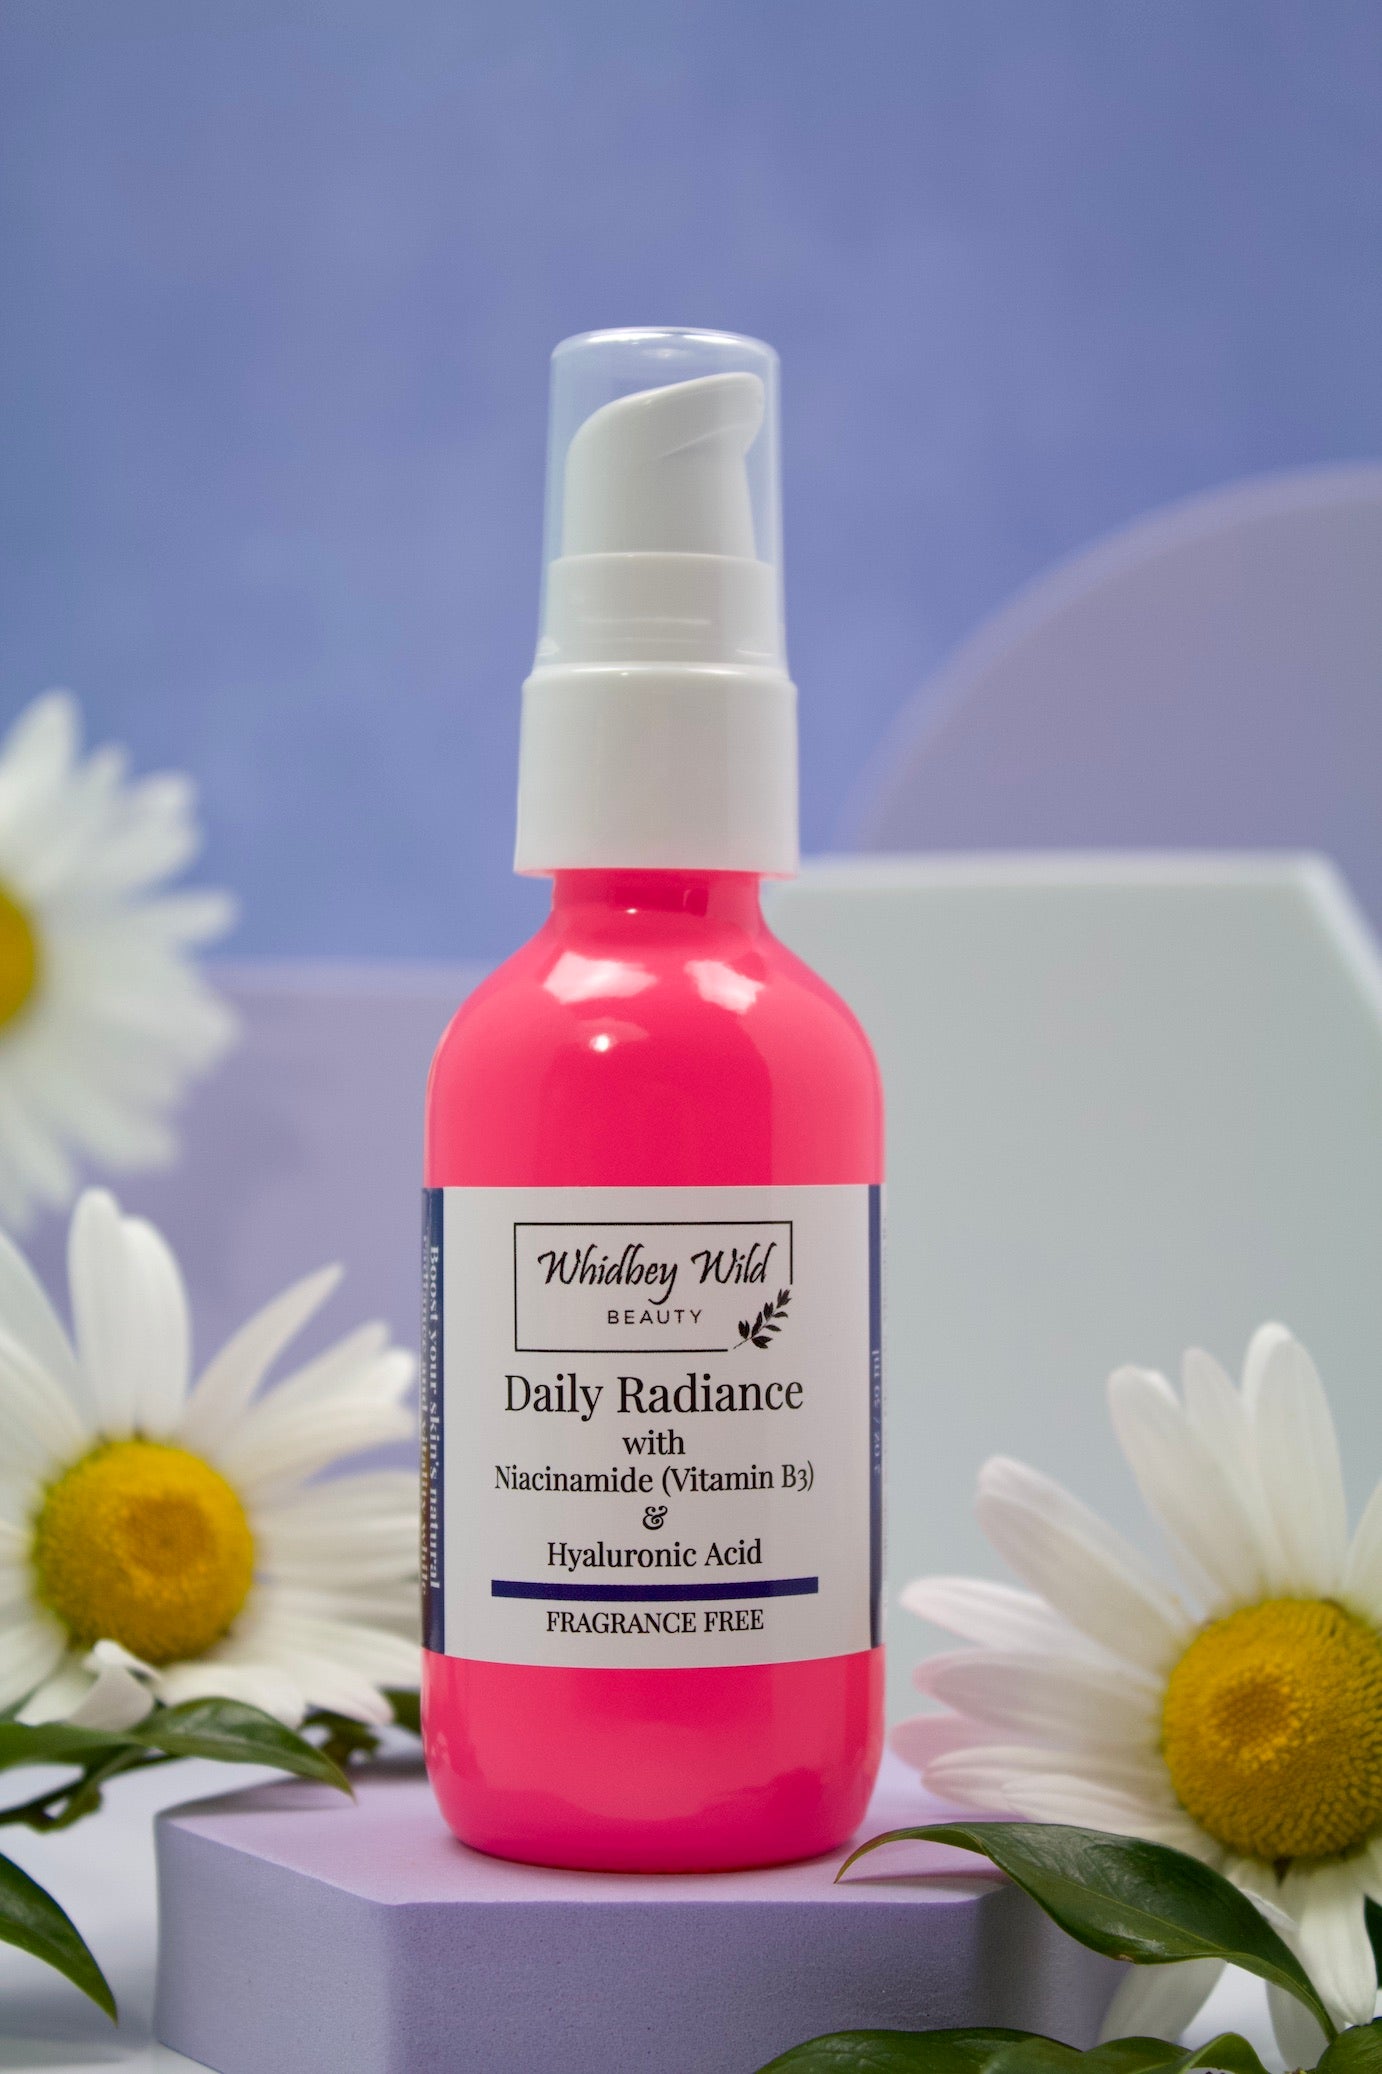 Daily Radiance with Niacinamide